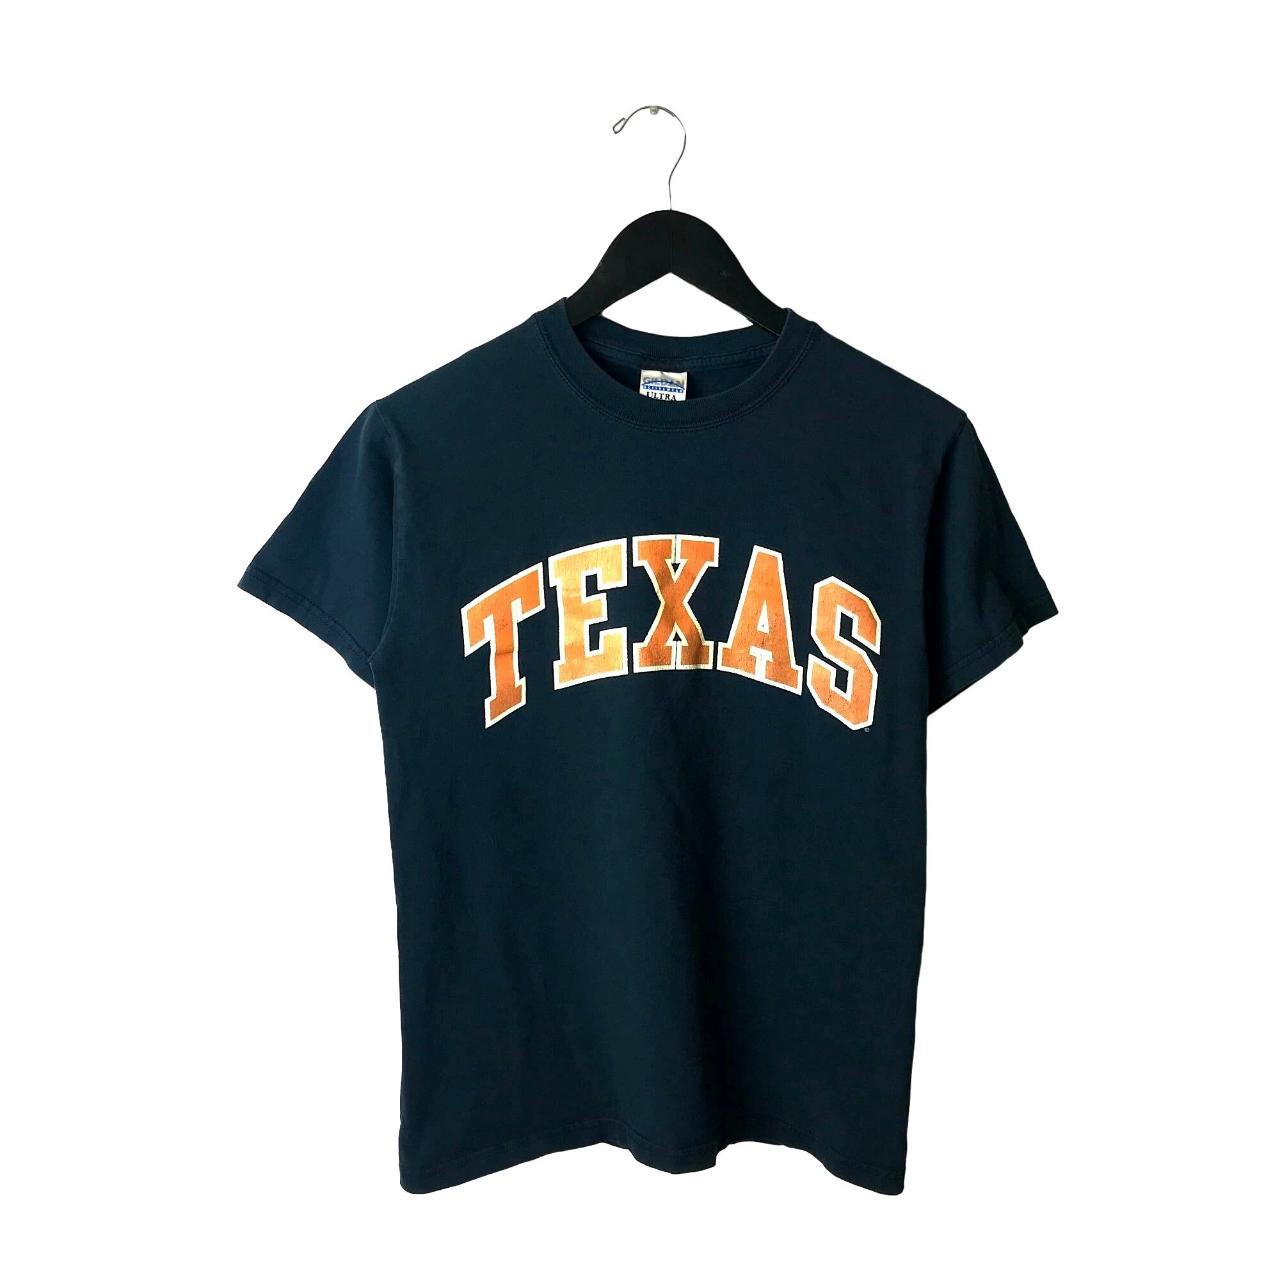 00s Vintage Texas State T Shirt Classic Graphic Tee... - Depop